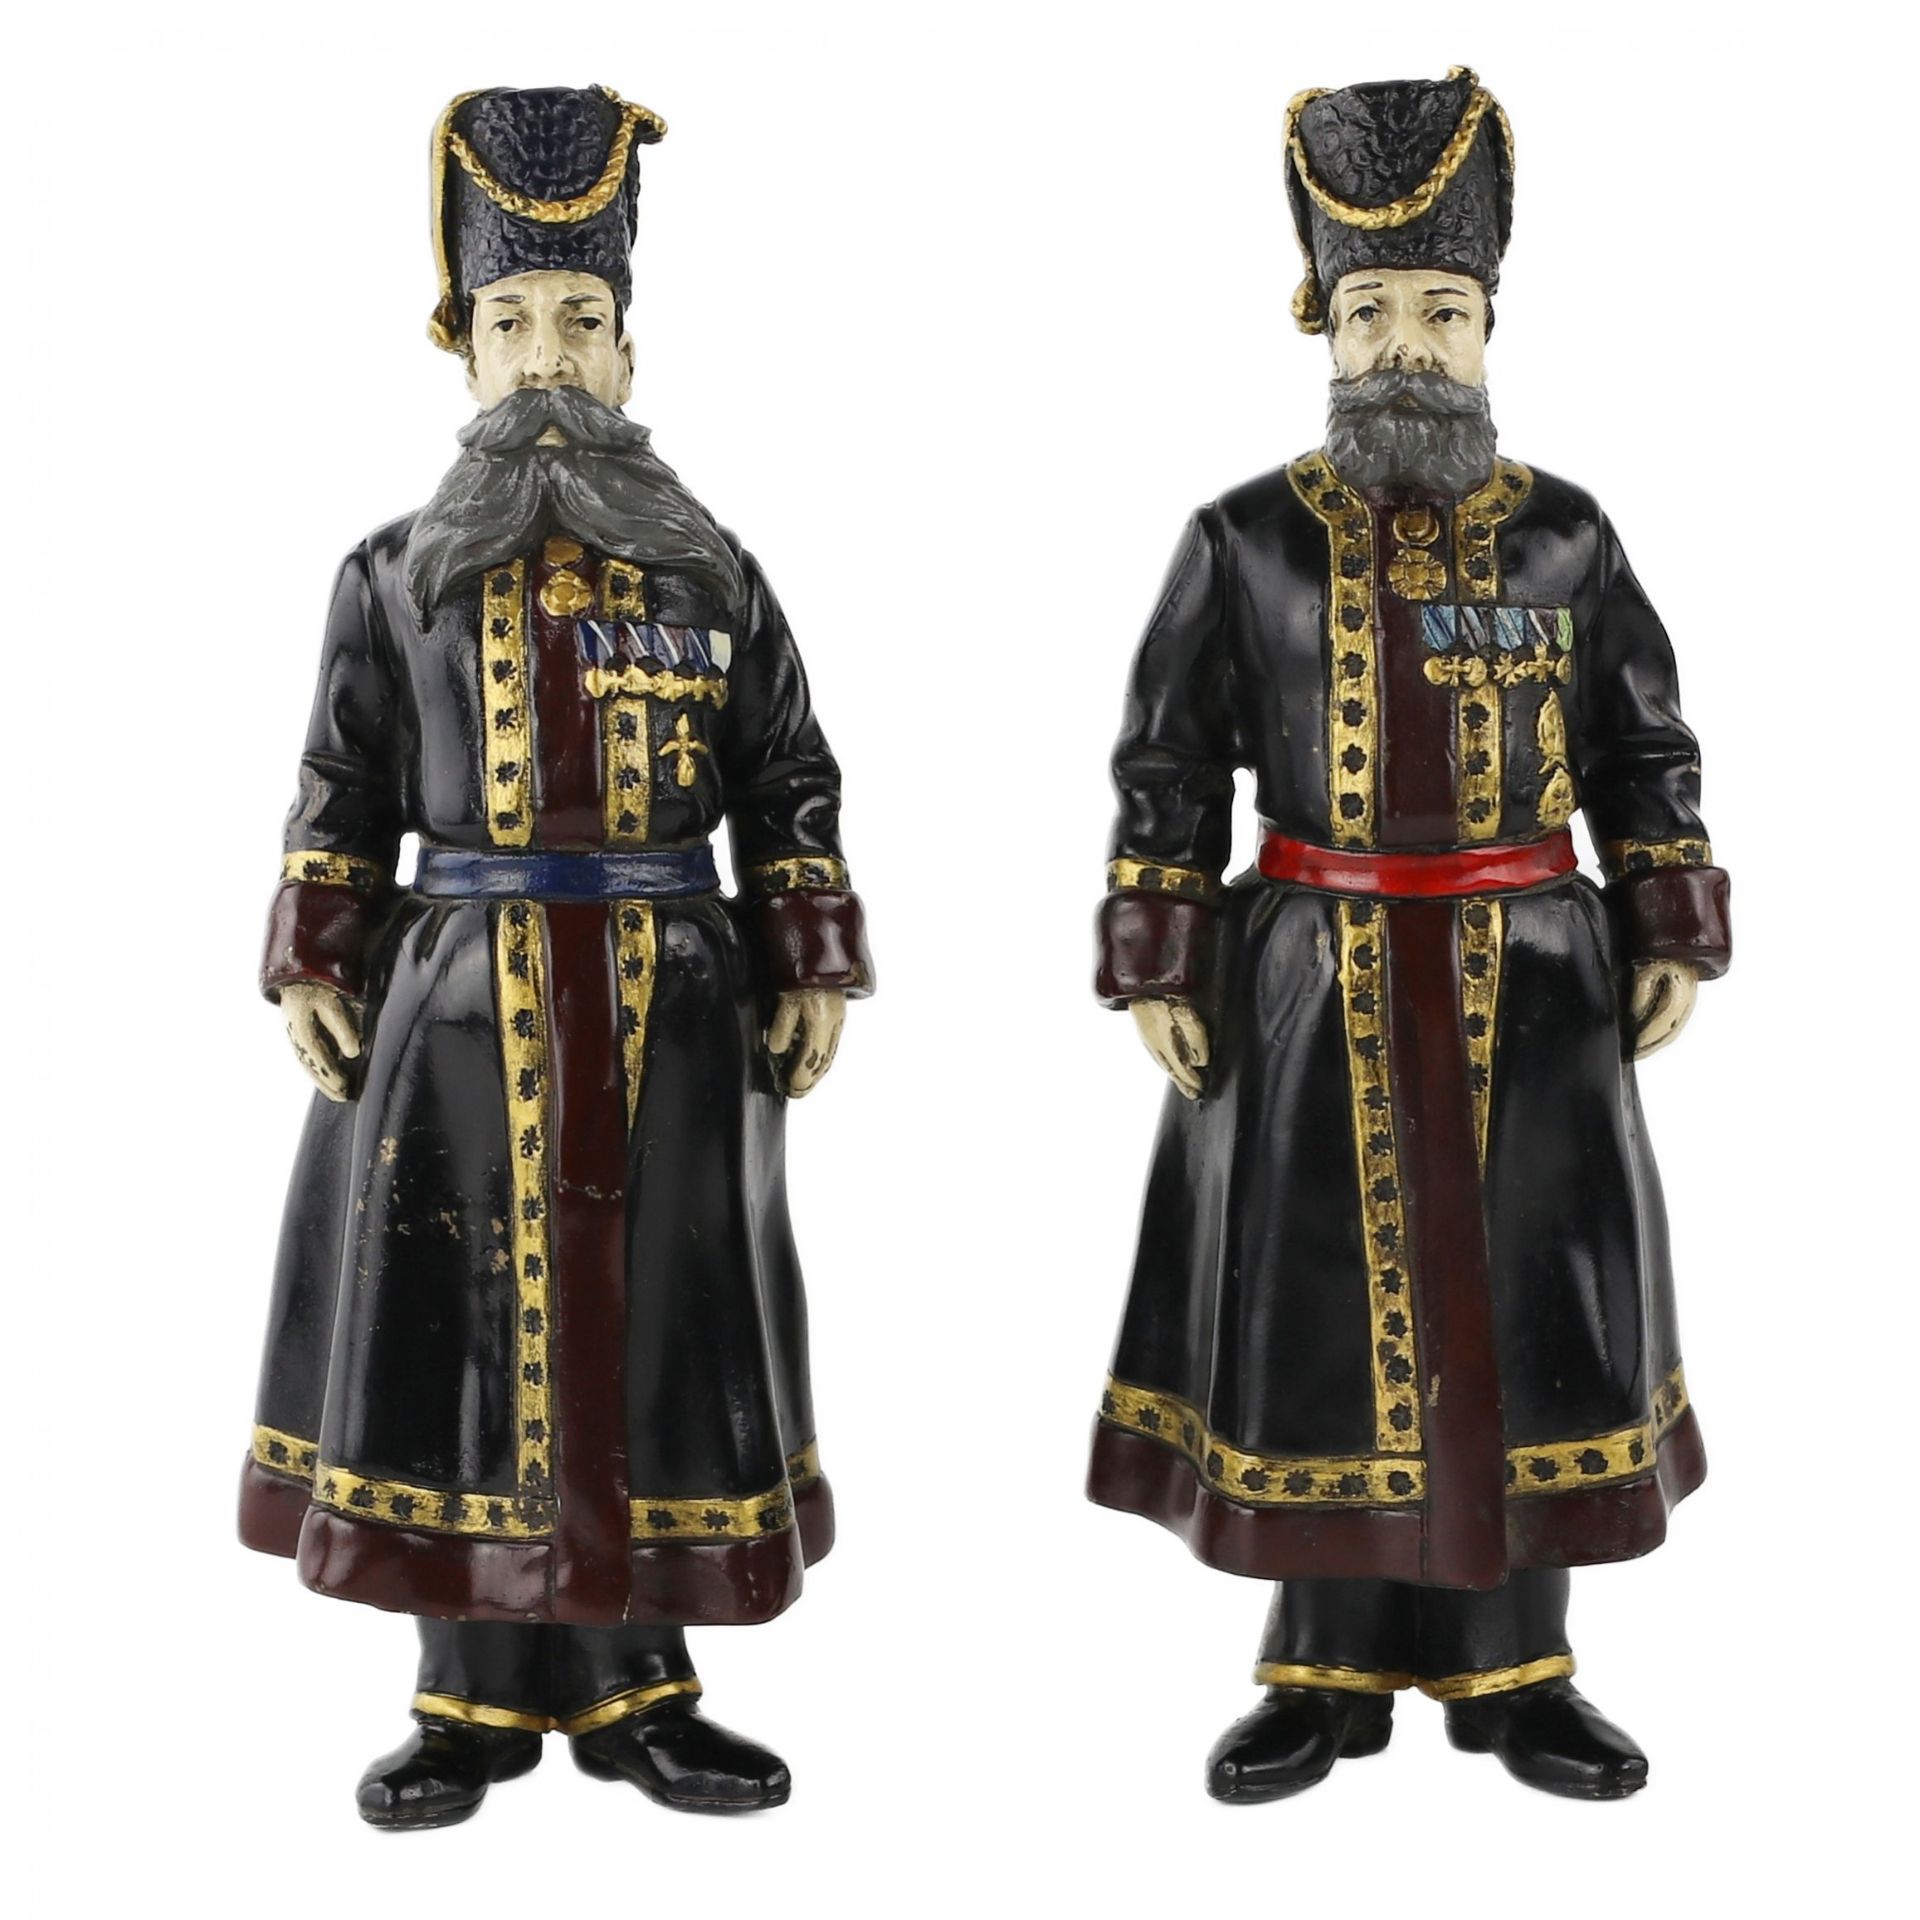 Pair of bronze figures of Russian Cossacks, personal guard of the Imperial Family. In the style of F